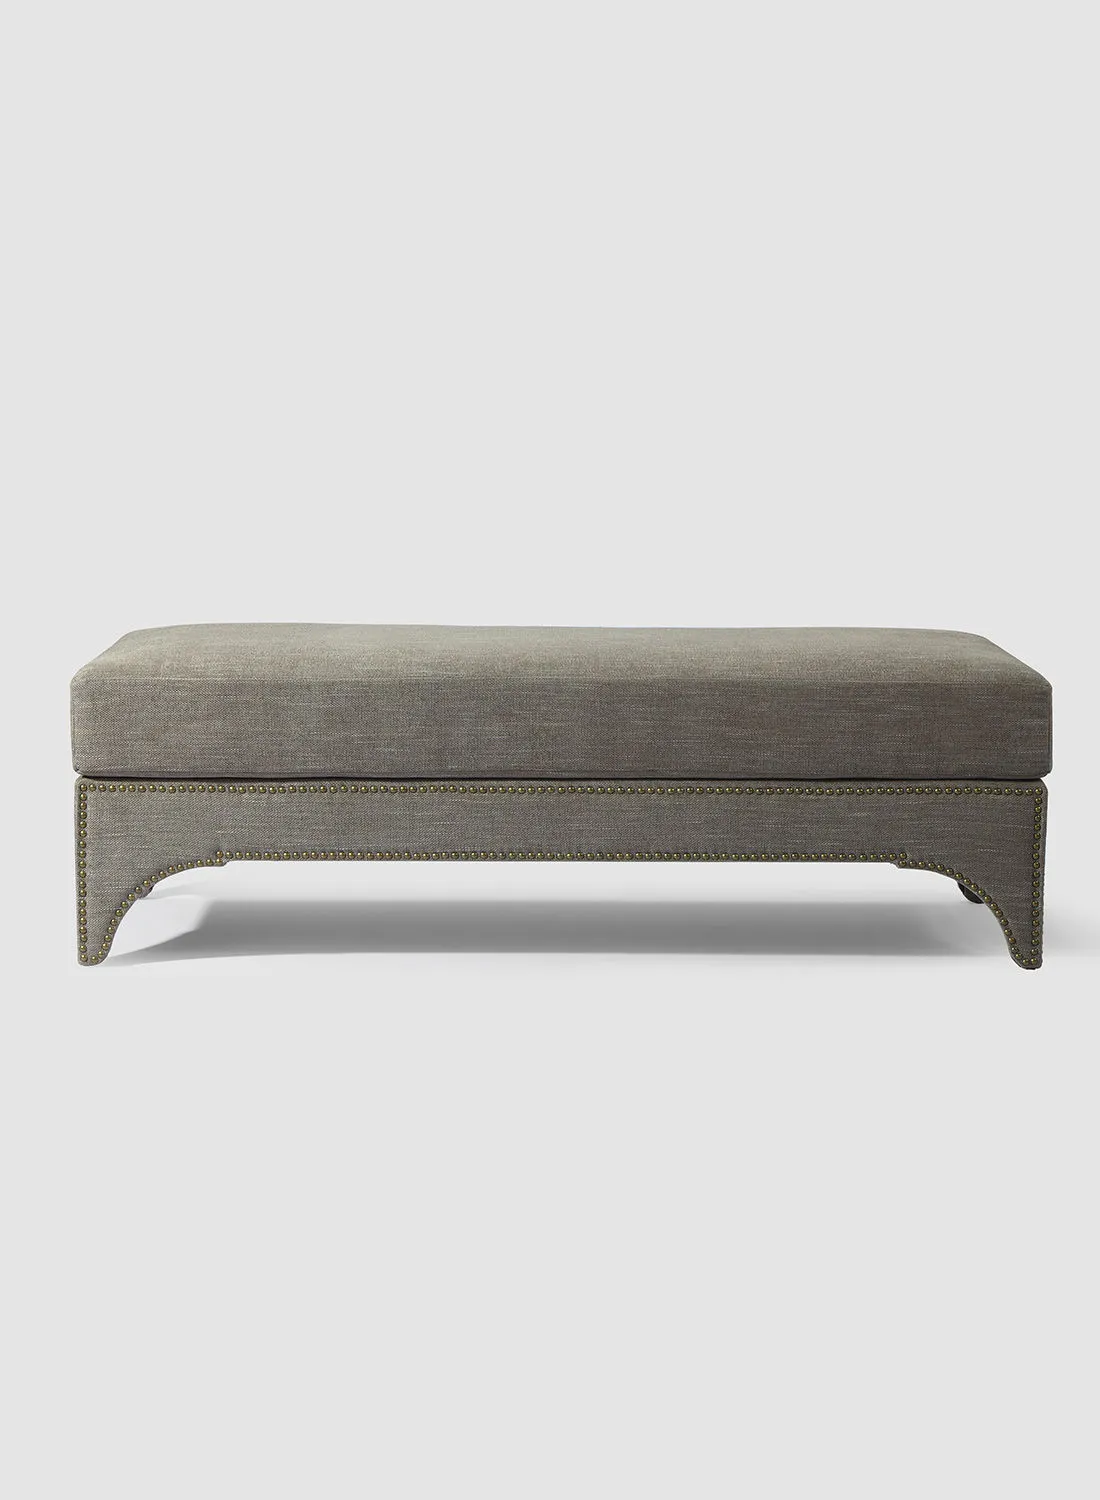 ebb & flow Petra Fabric Upholstered Bed End Bench - Entryway Shoe Bench For The Perfect Stylish Home Bedroom Dark Grey 180 x 50 x 50cm